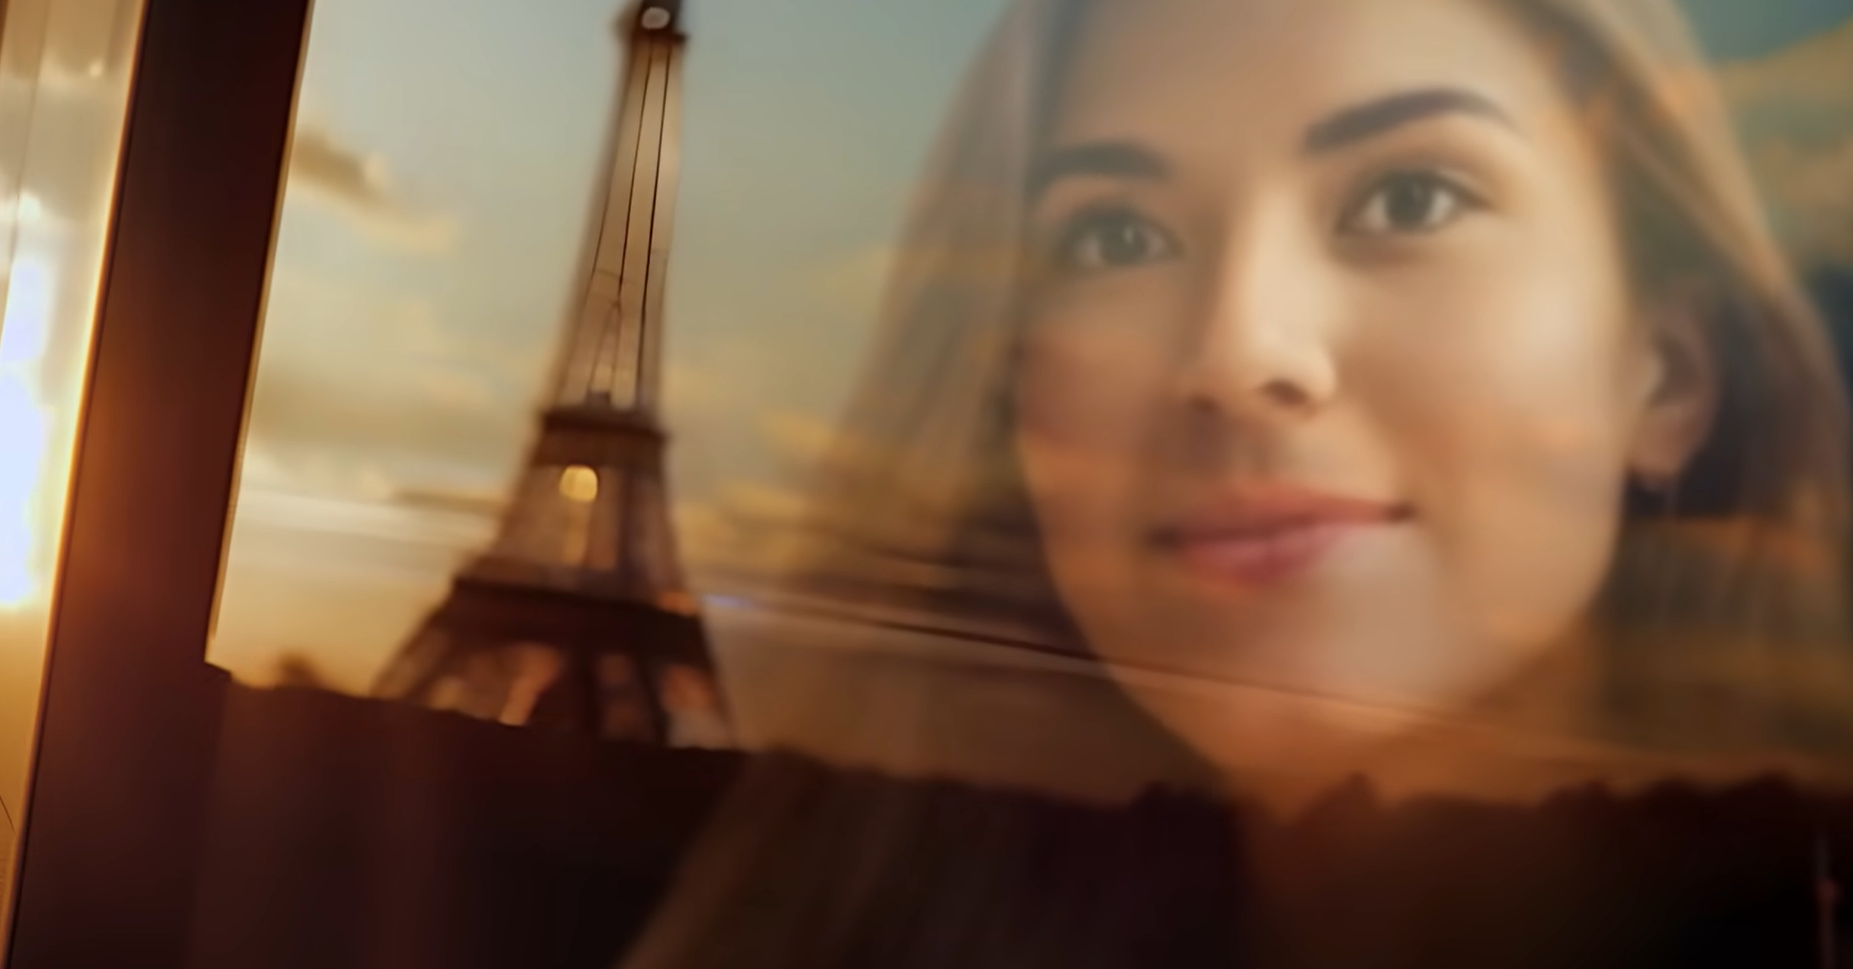 A screenshot from an AI-generated film showing the Eiffel Tower and a girl's face